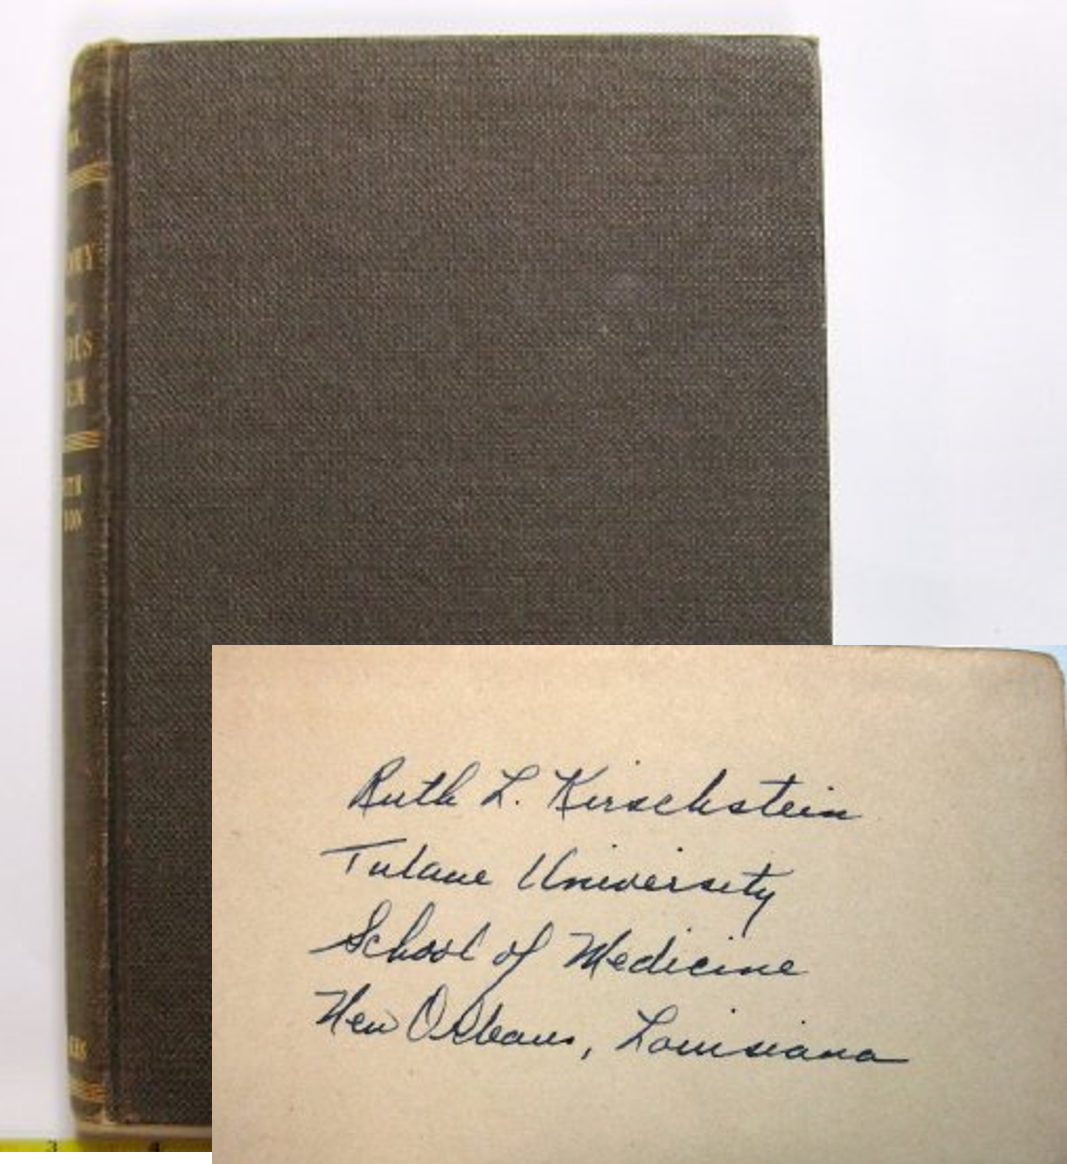 Image of Ruth Kirschstein's thesis from Tulane University in New Orleans, LA